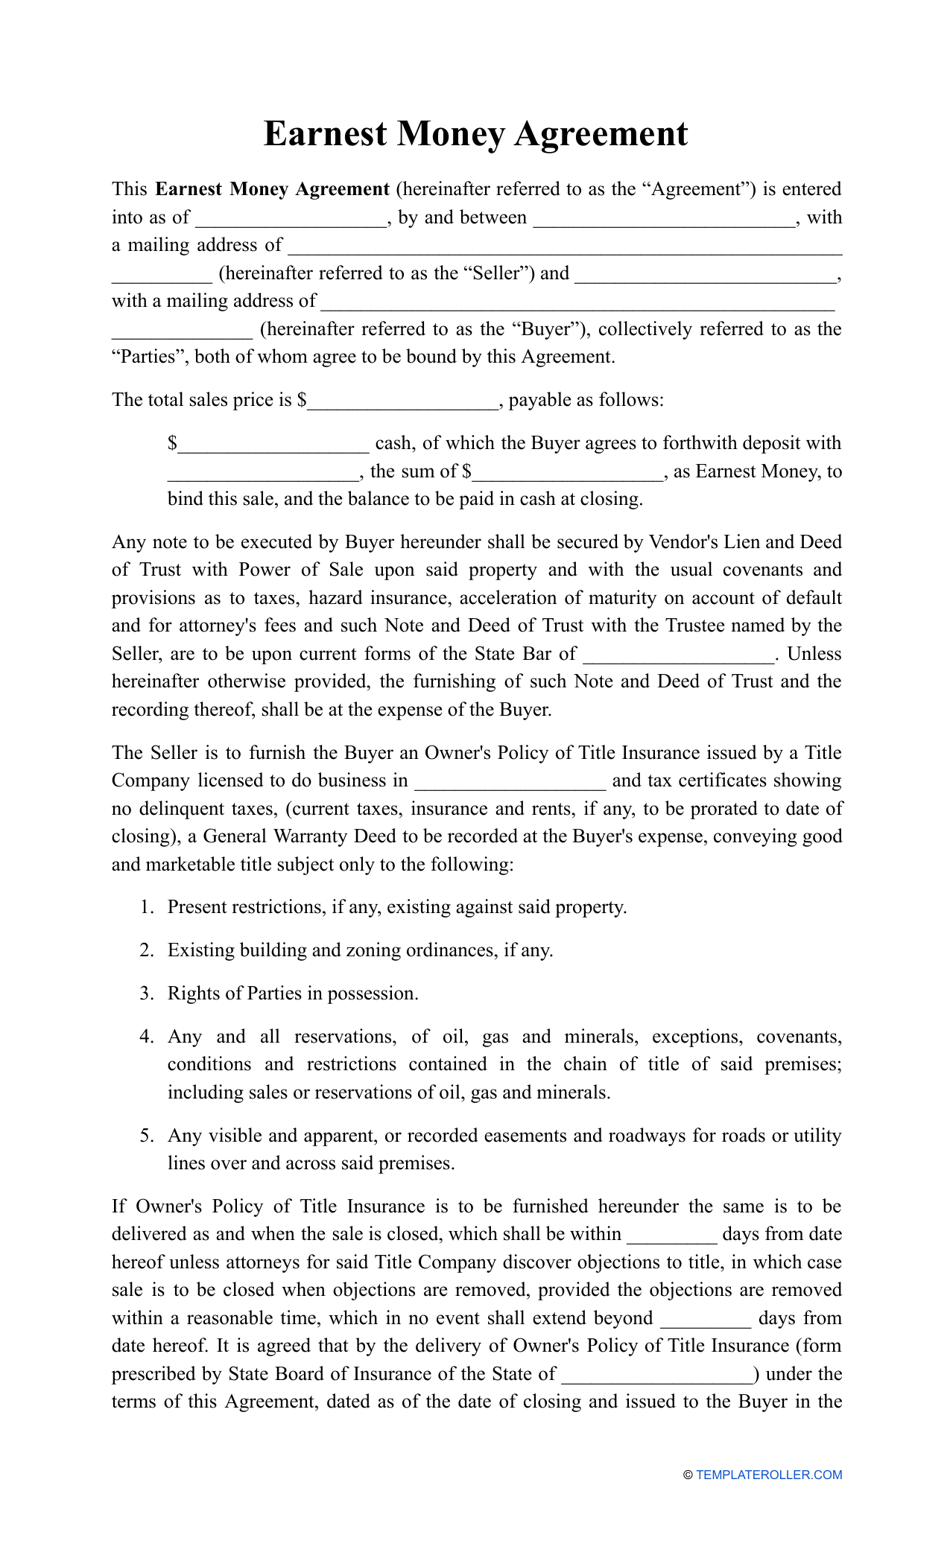 Earnest Money Agreement, Page 1